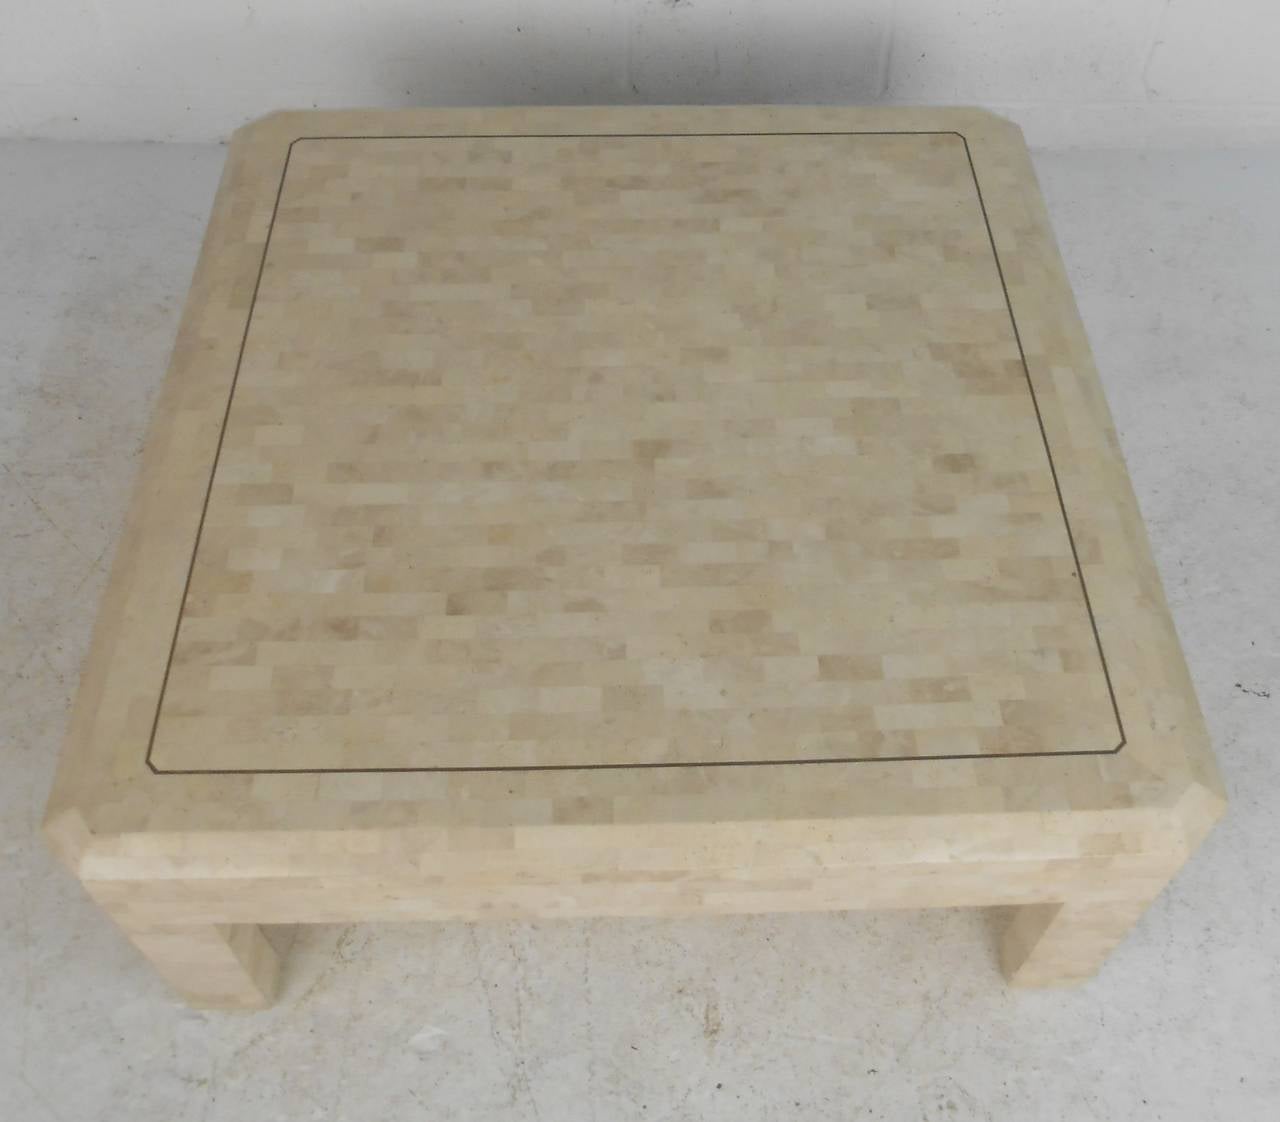 Vintage Maitland-Smith style coffee table features tessellated coral stone over wood core with brass inlay. Stylish square coffee table adds elegant mid-century modern vibe to any interior. Please confirm item location (NY or NJ) with dealer.